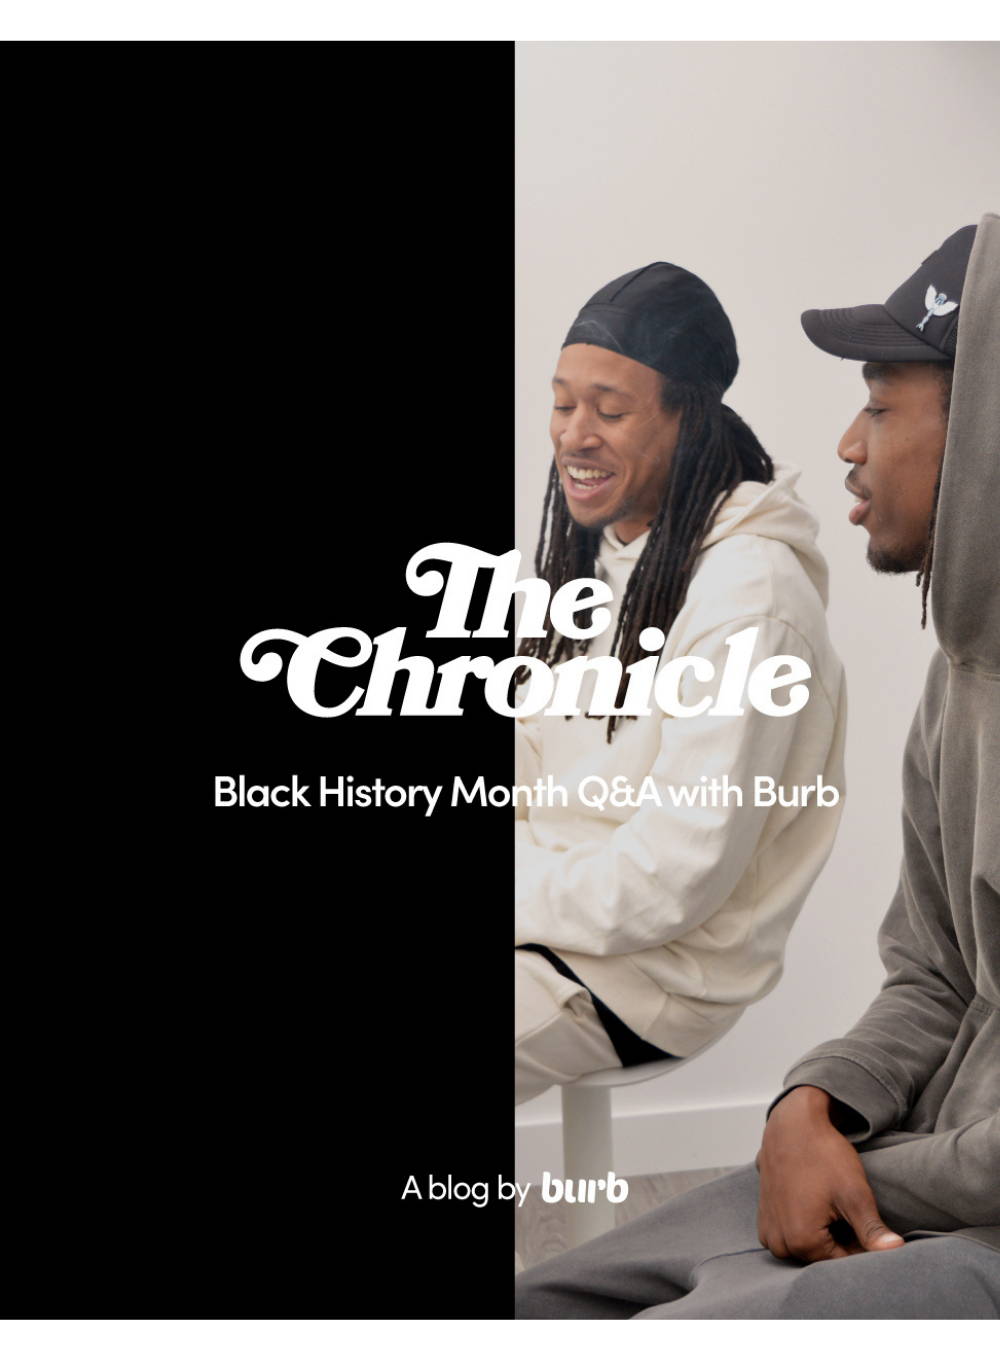 Black History Month Q&A with Burb